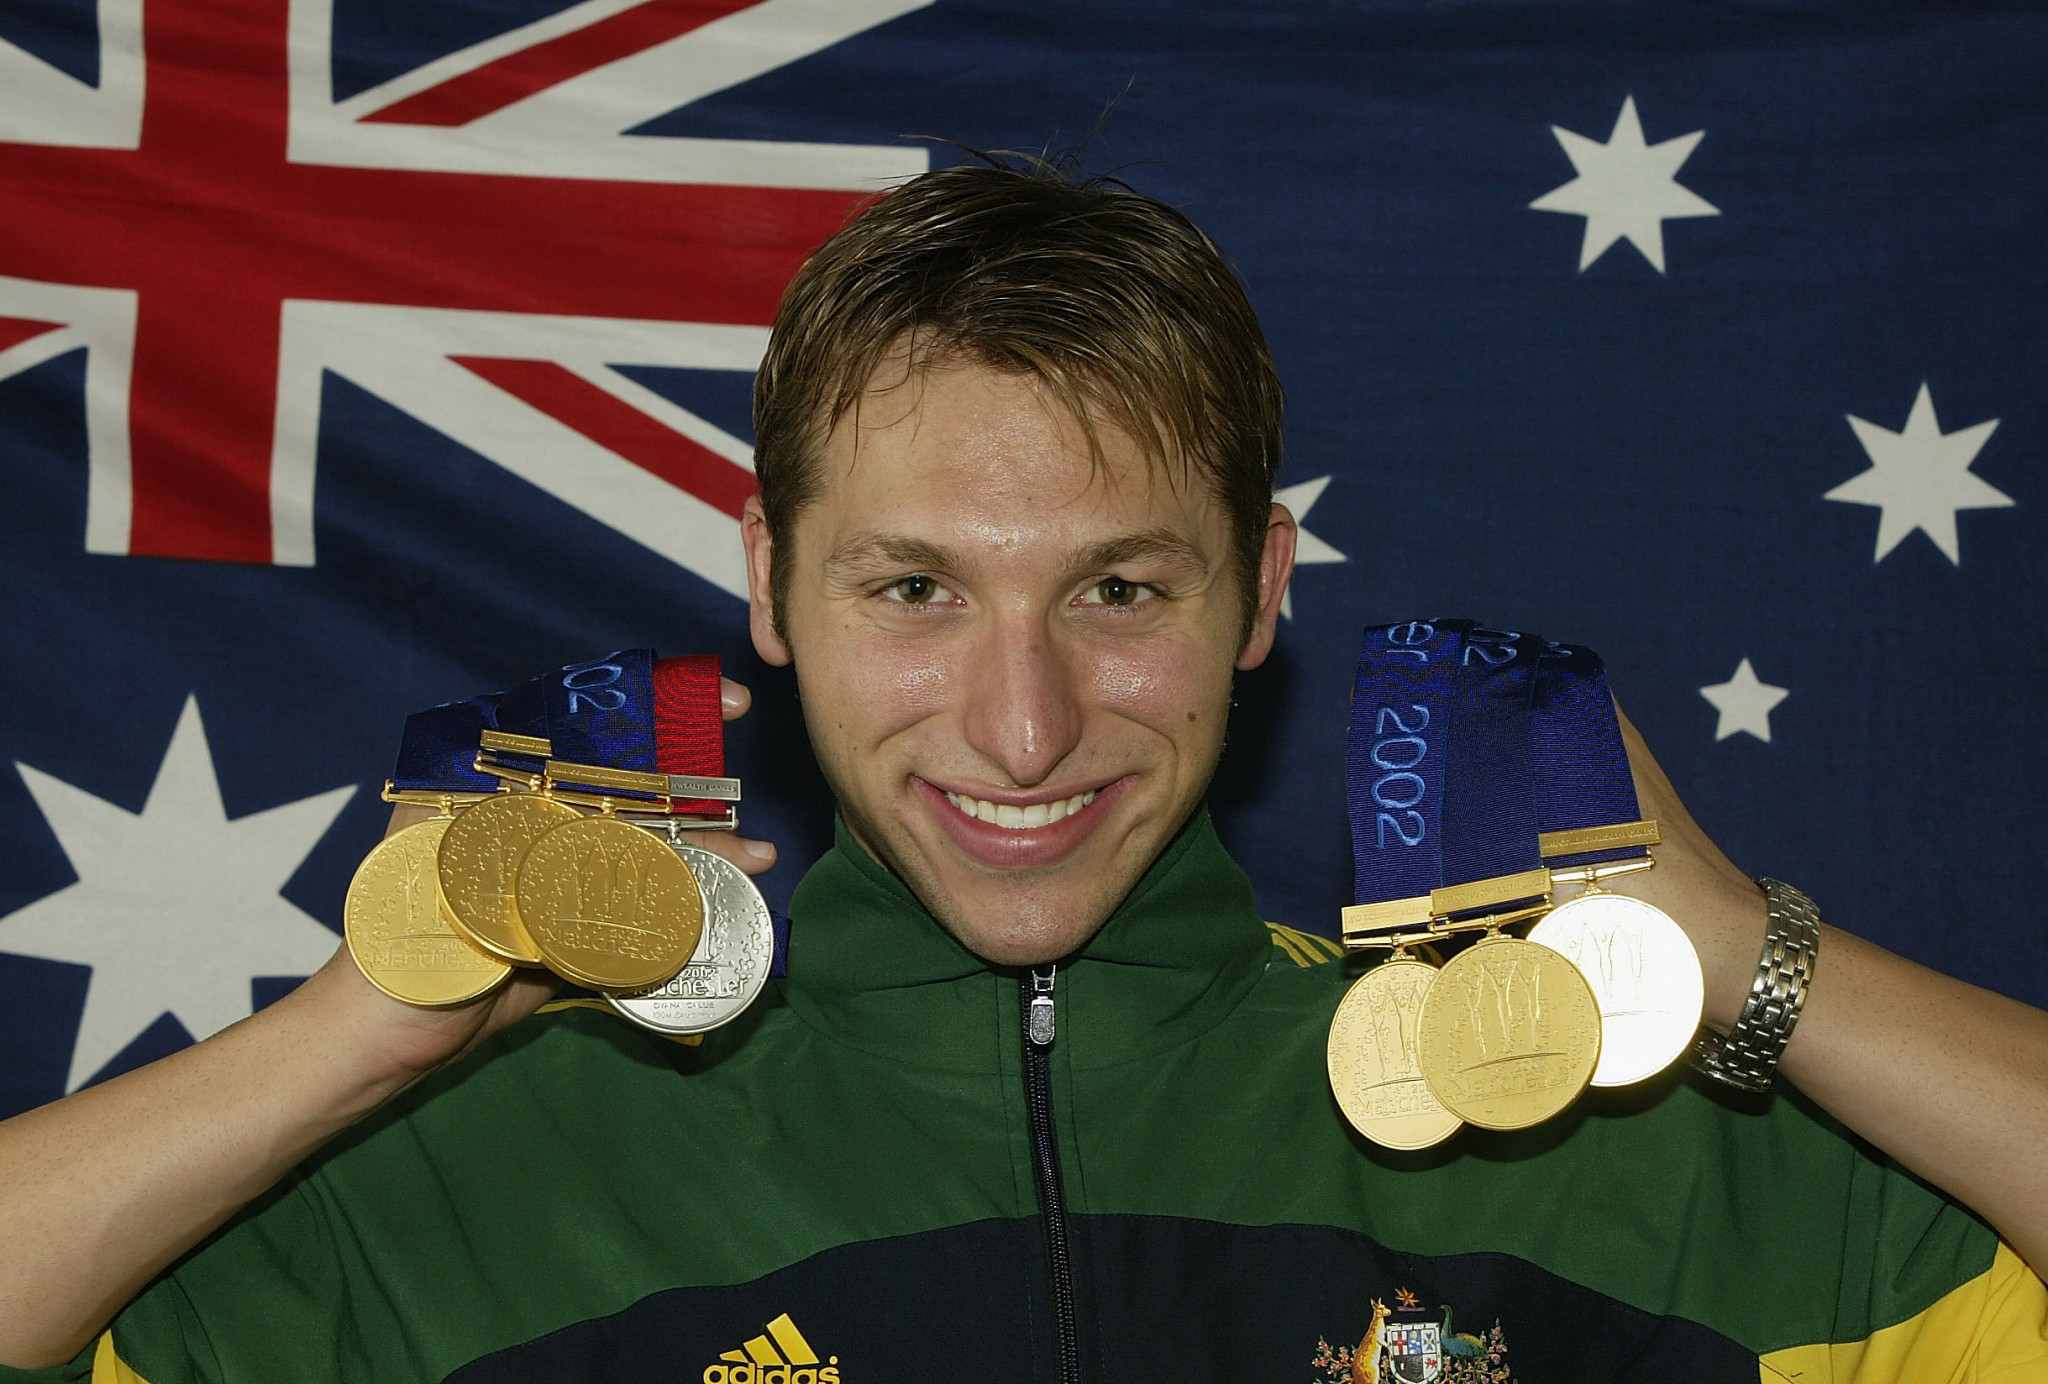 Ian Thorpe won six gold medals at Manchester 2002 ©Getty Images